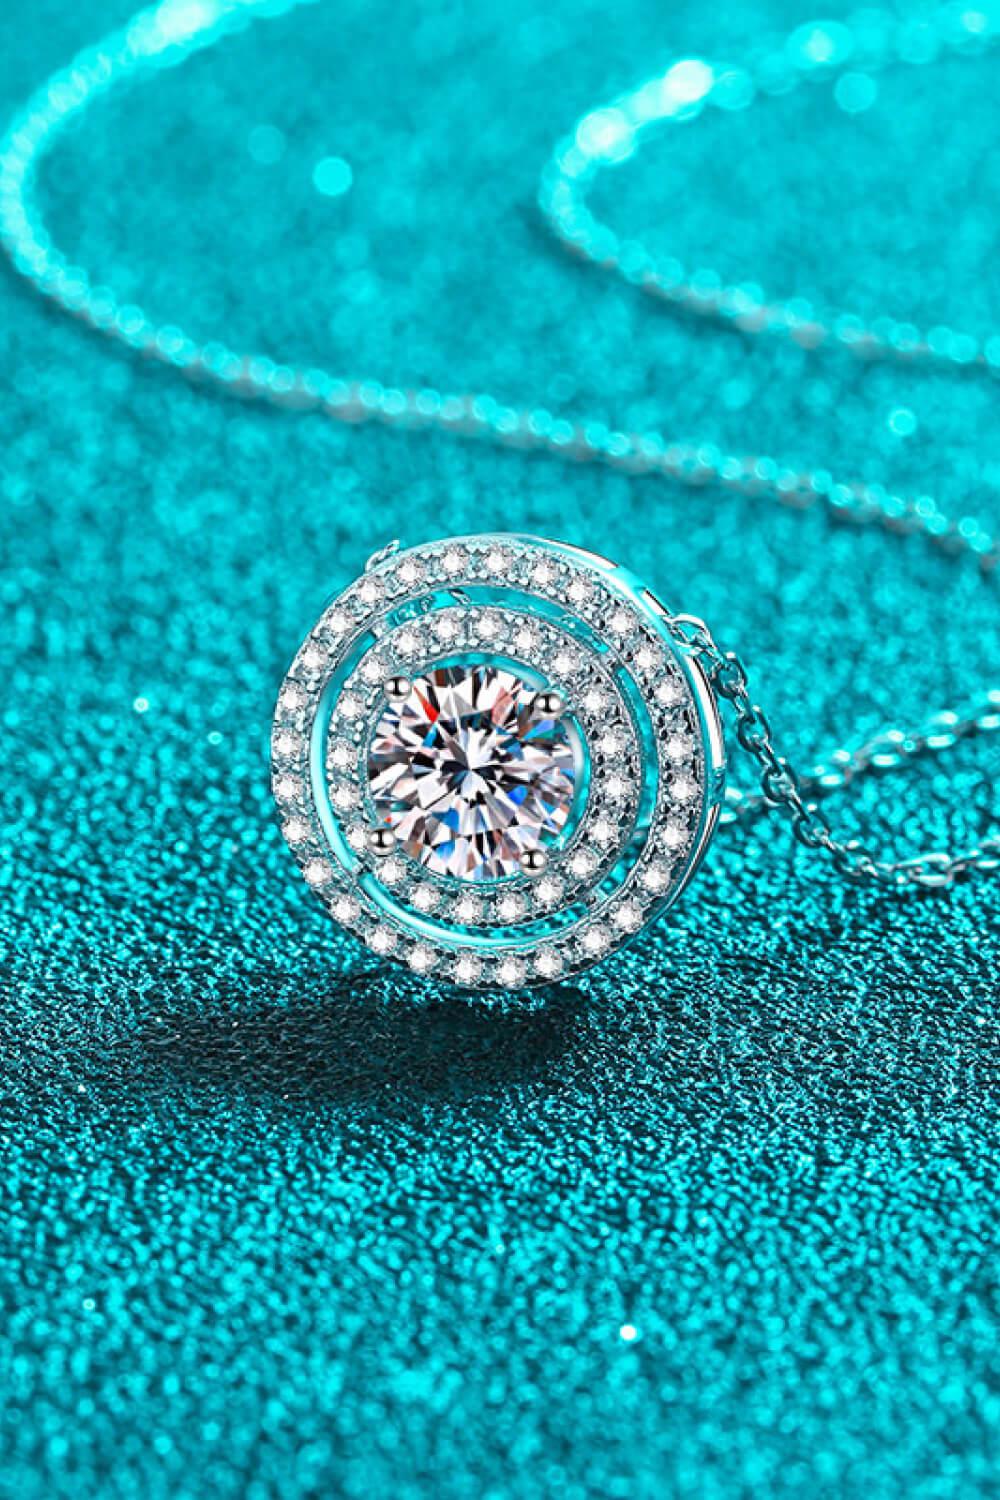 Moissanite Round Pendant Rhodium-Plated Necklace BLUE ZONE PLANET